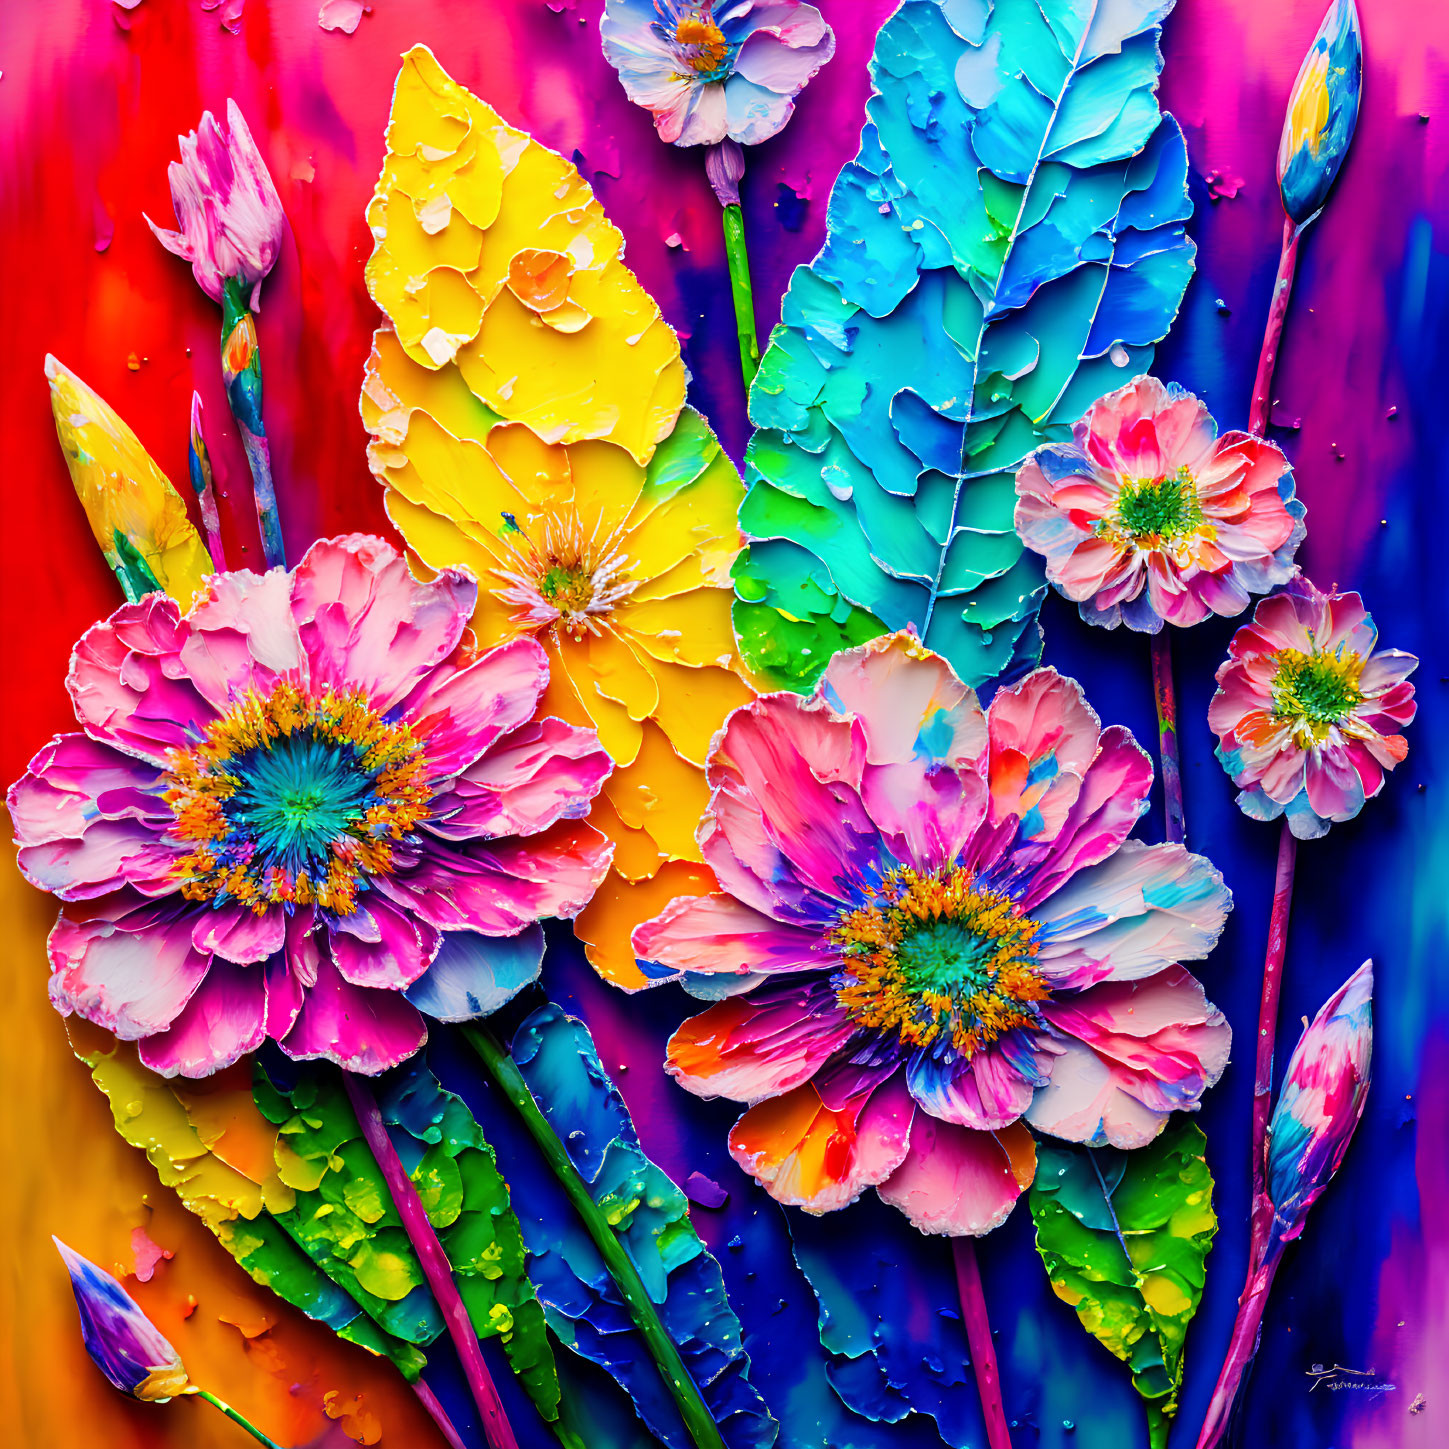 Vibrant flowers and textured leaves on colorful backdrop